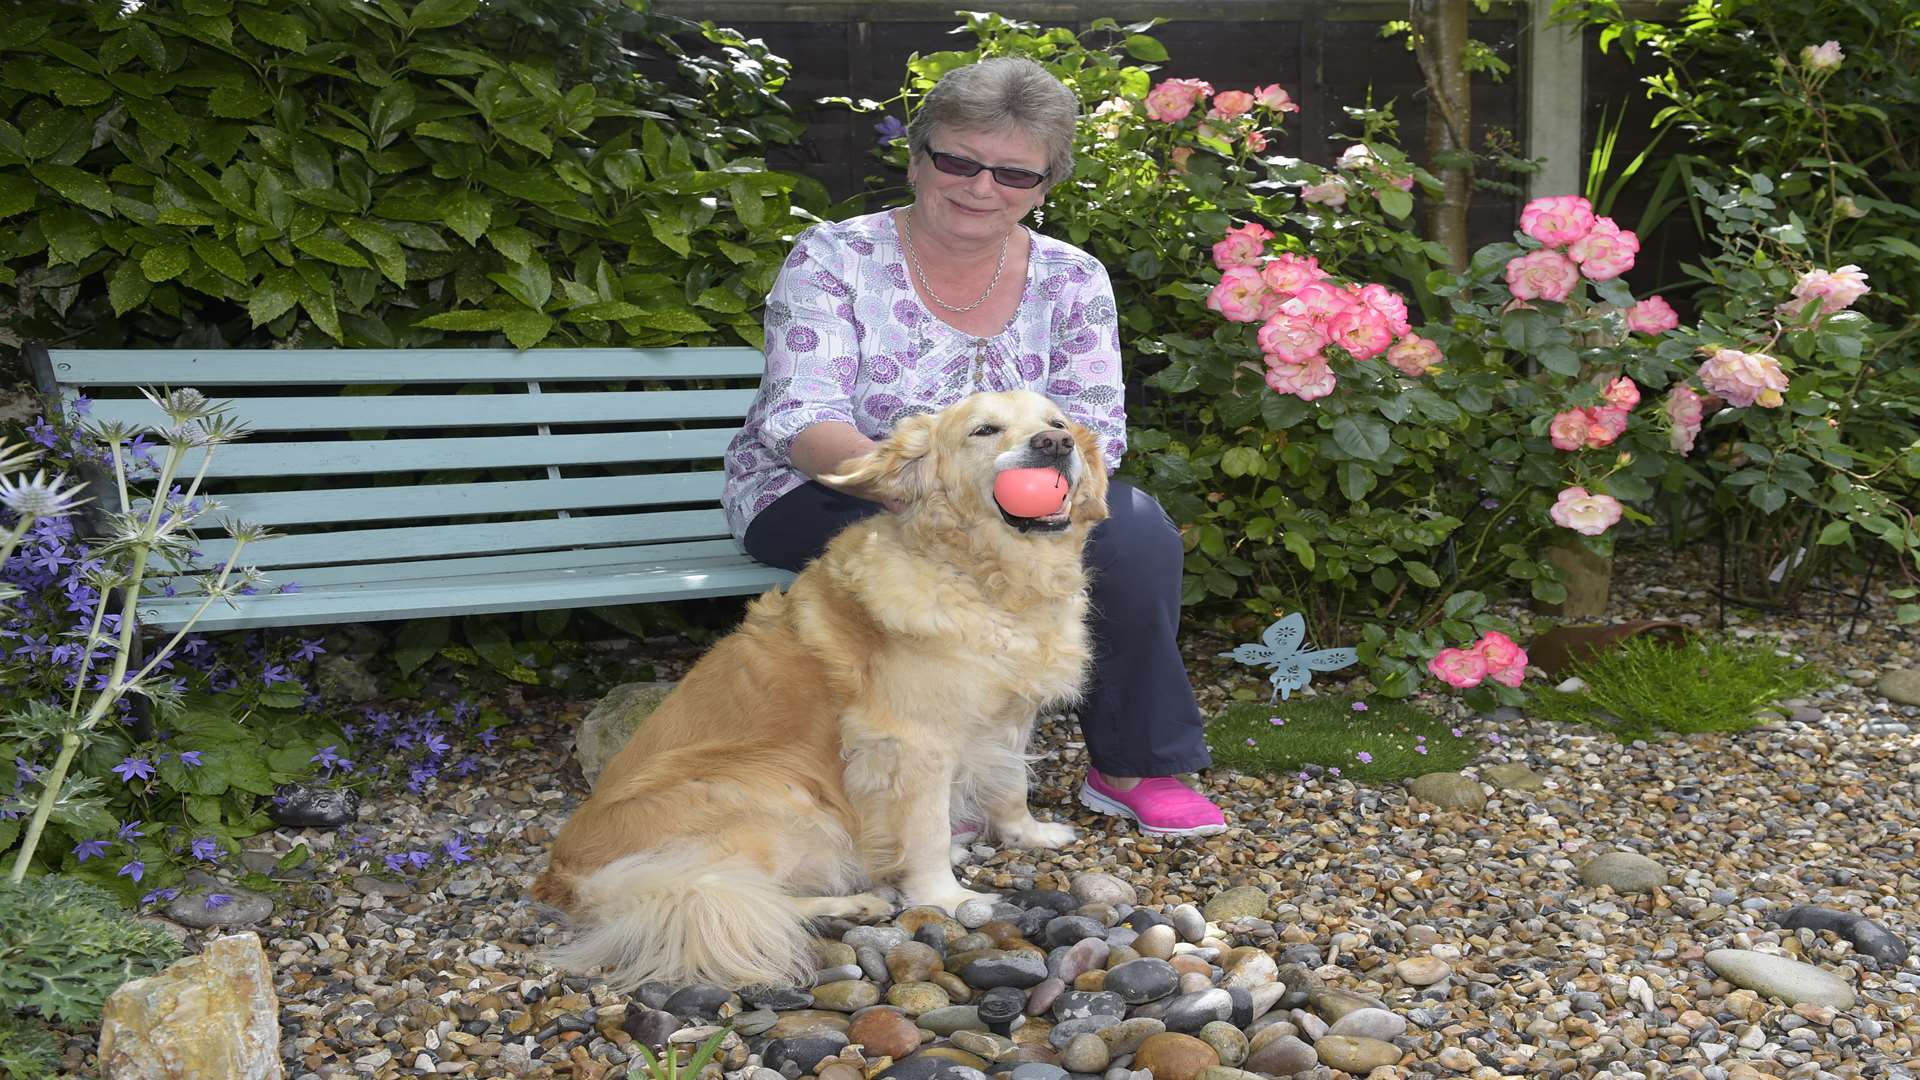 Jan Ware with her dog Lady in her garden in West Lea, Deal.